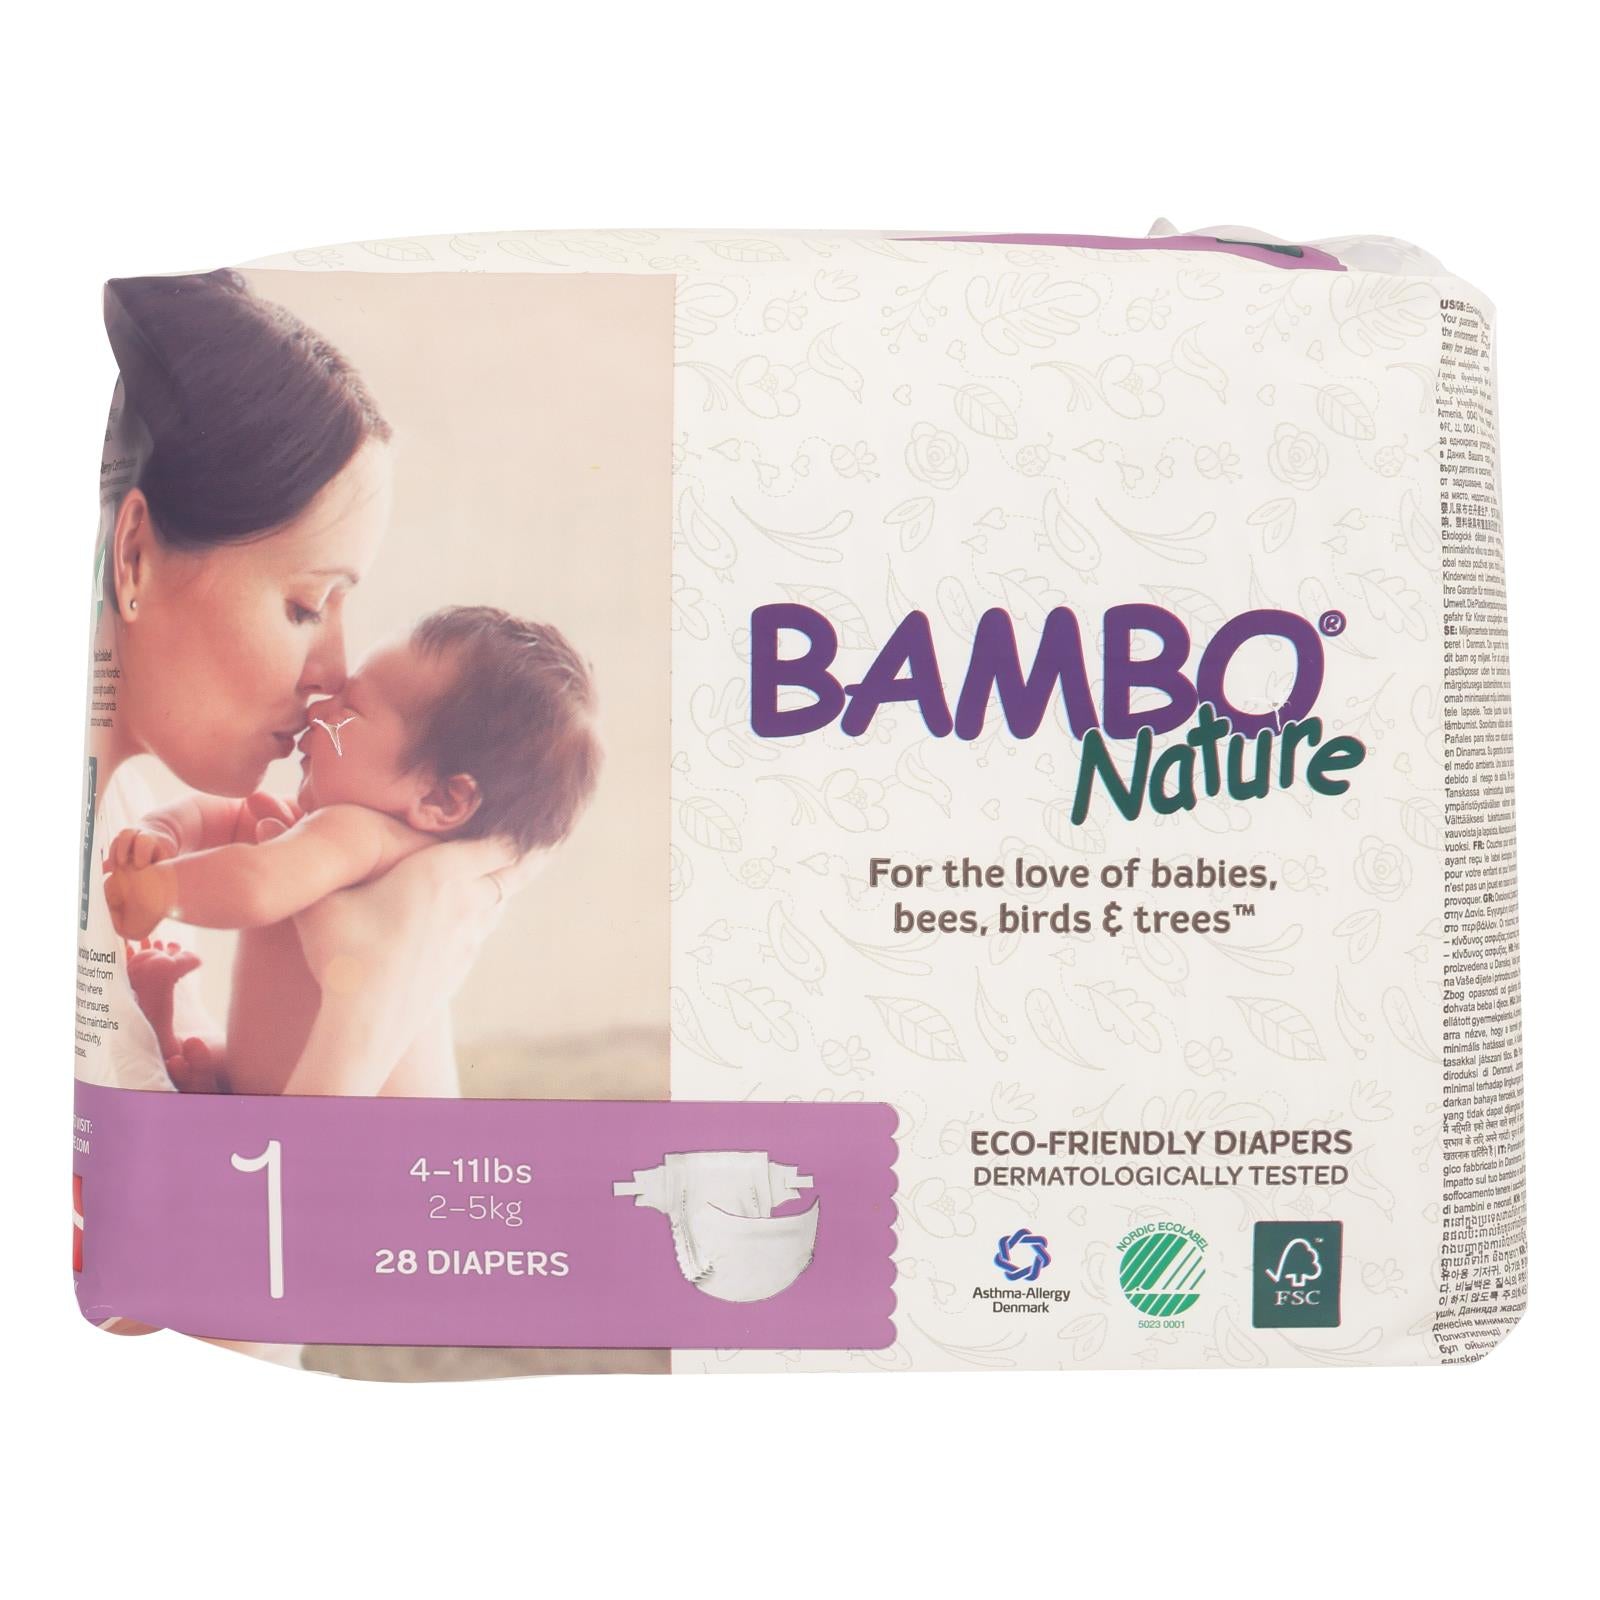 Bambo Nature, Bambo Nature Eco-Friendly Diapers  - Case of 6 - 28 CT (Pack of 6)